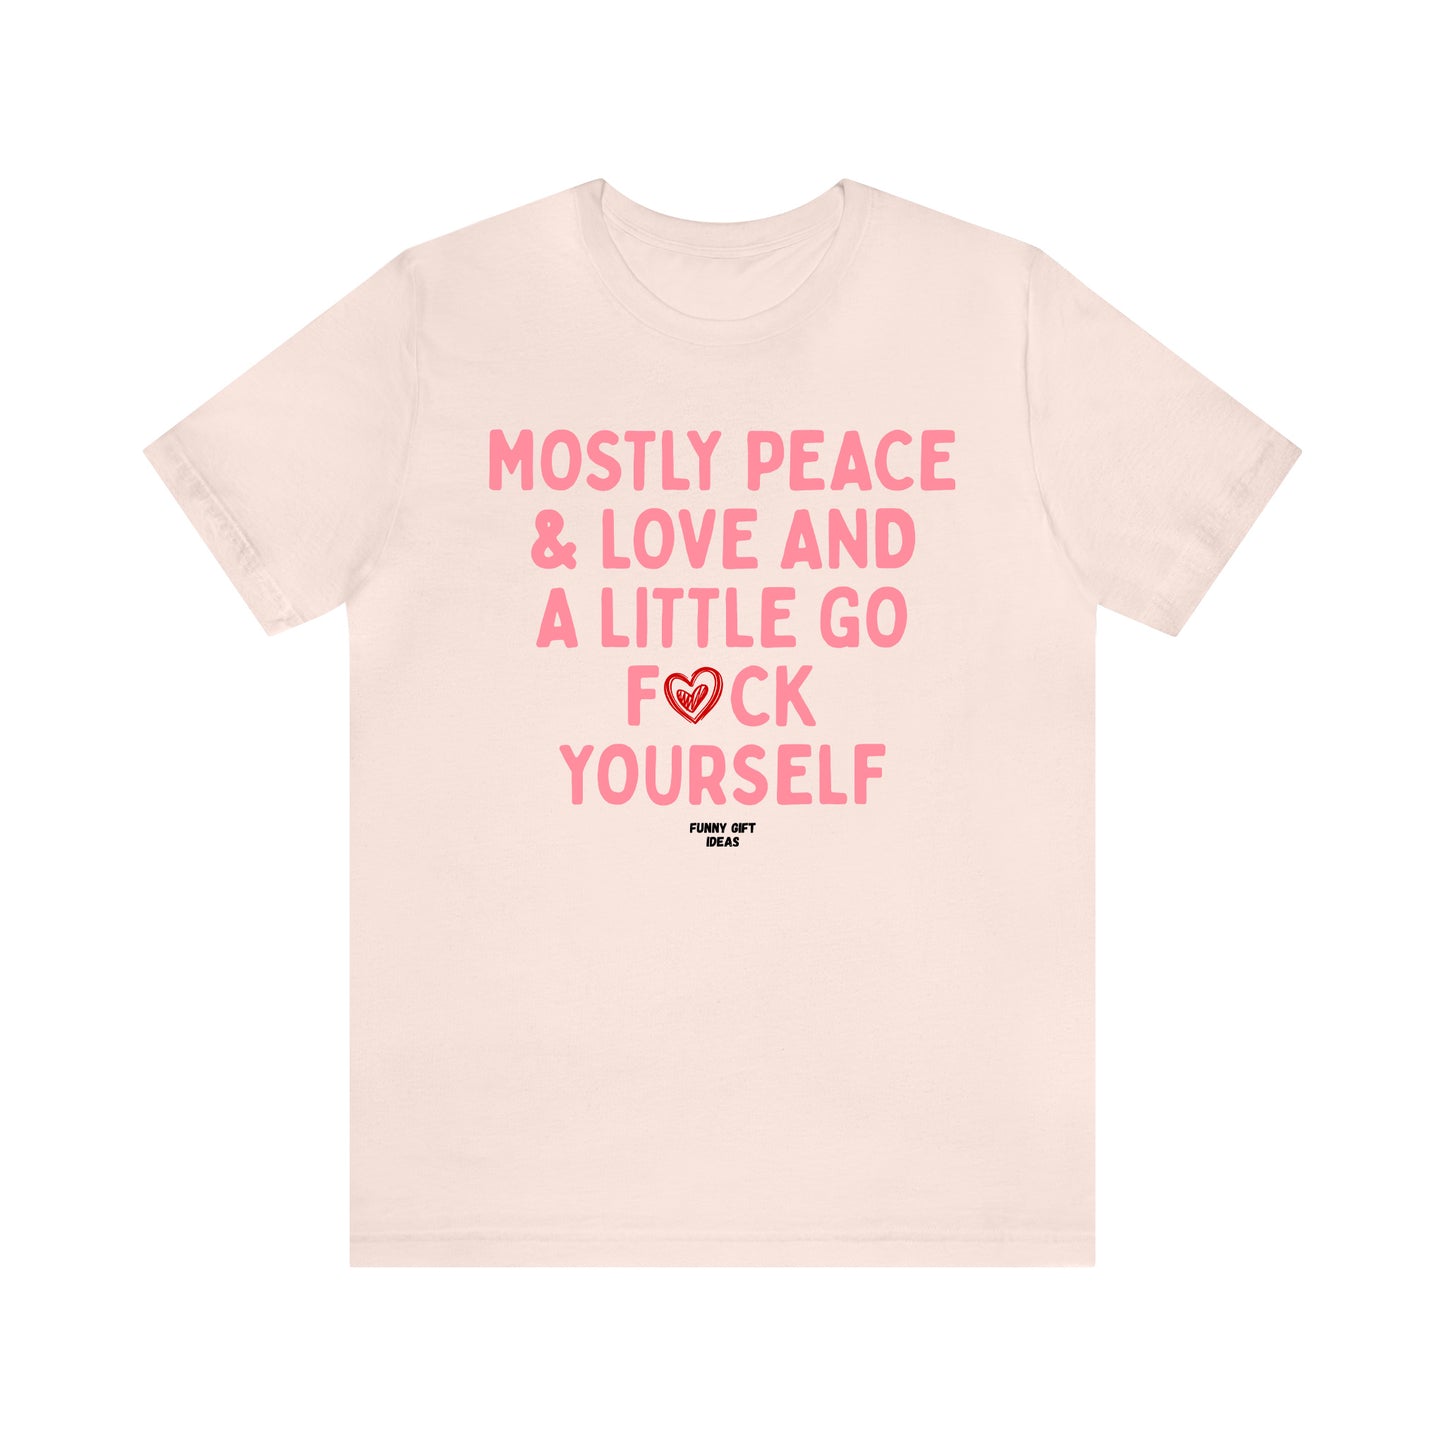 Funny Shirts for Women - Mostly Peace & Love and a Little Go Fuck Yourself - Women's T Shirts